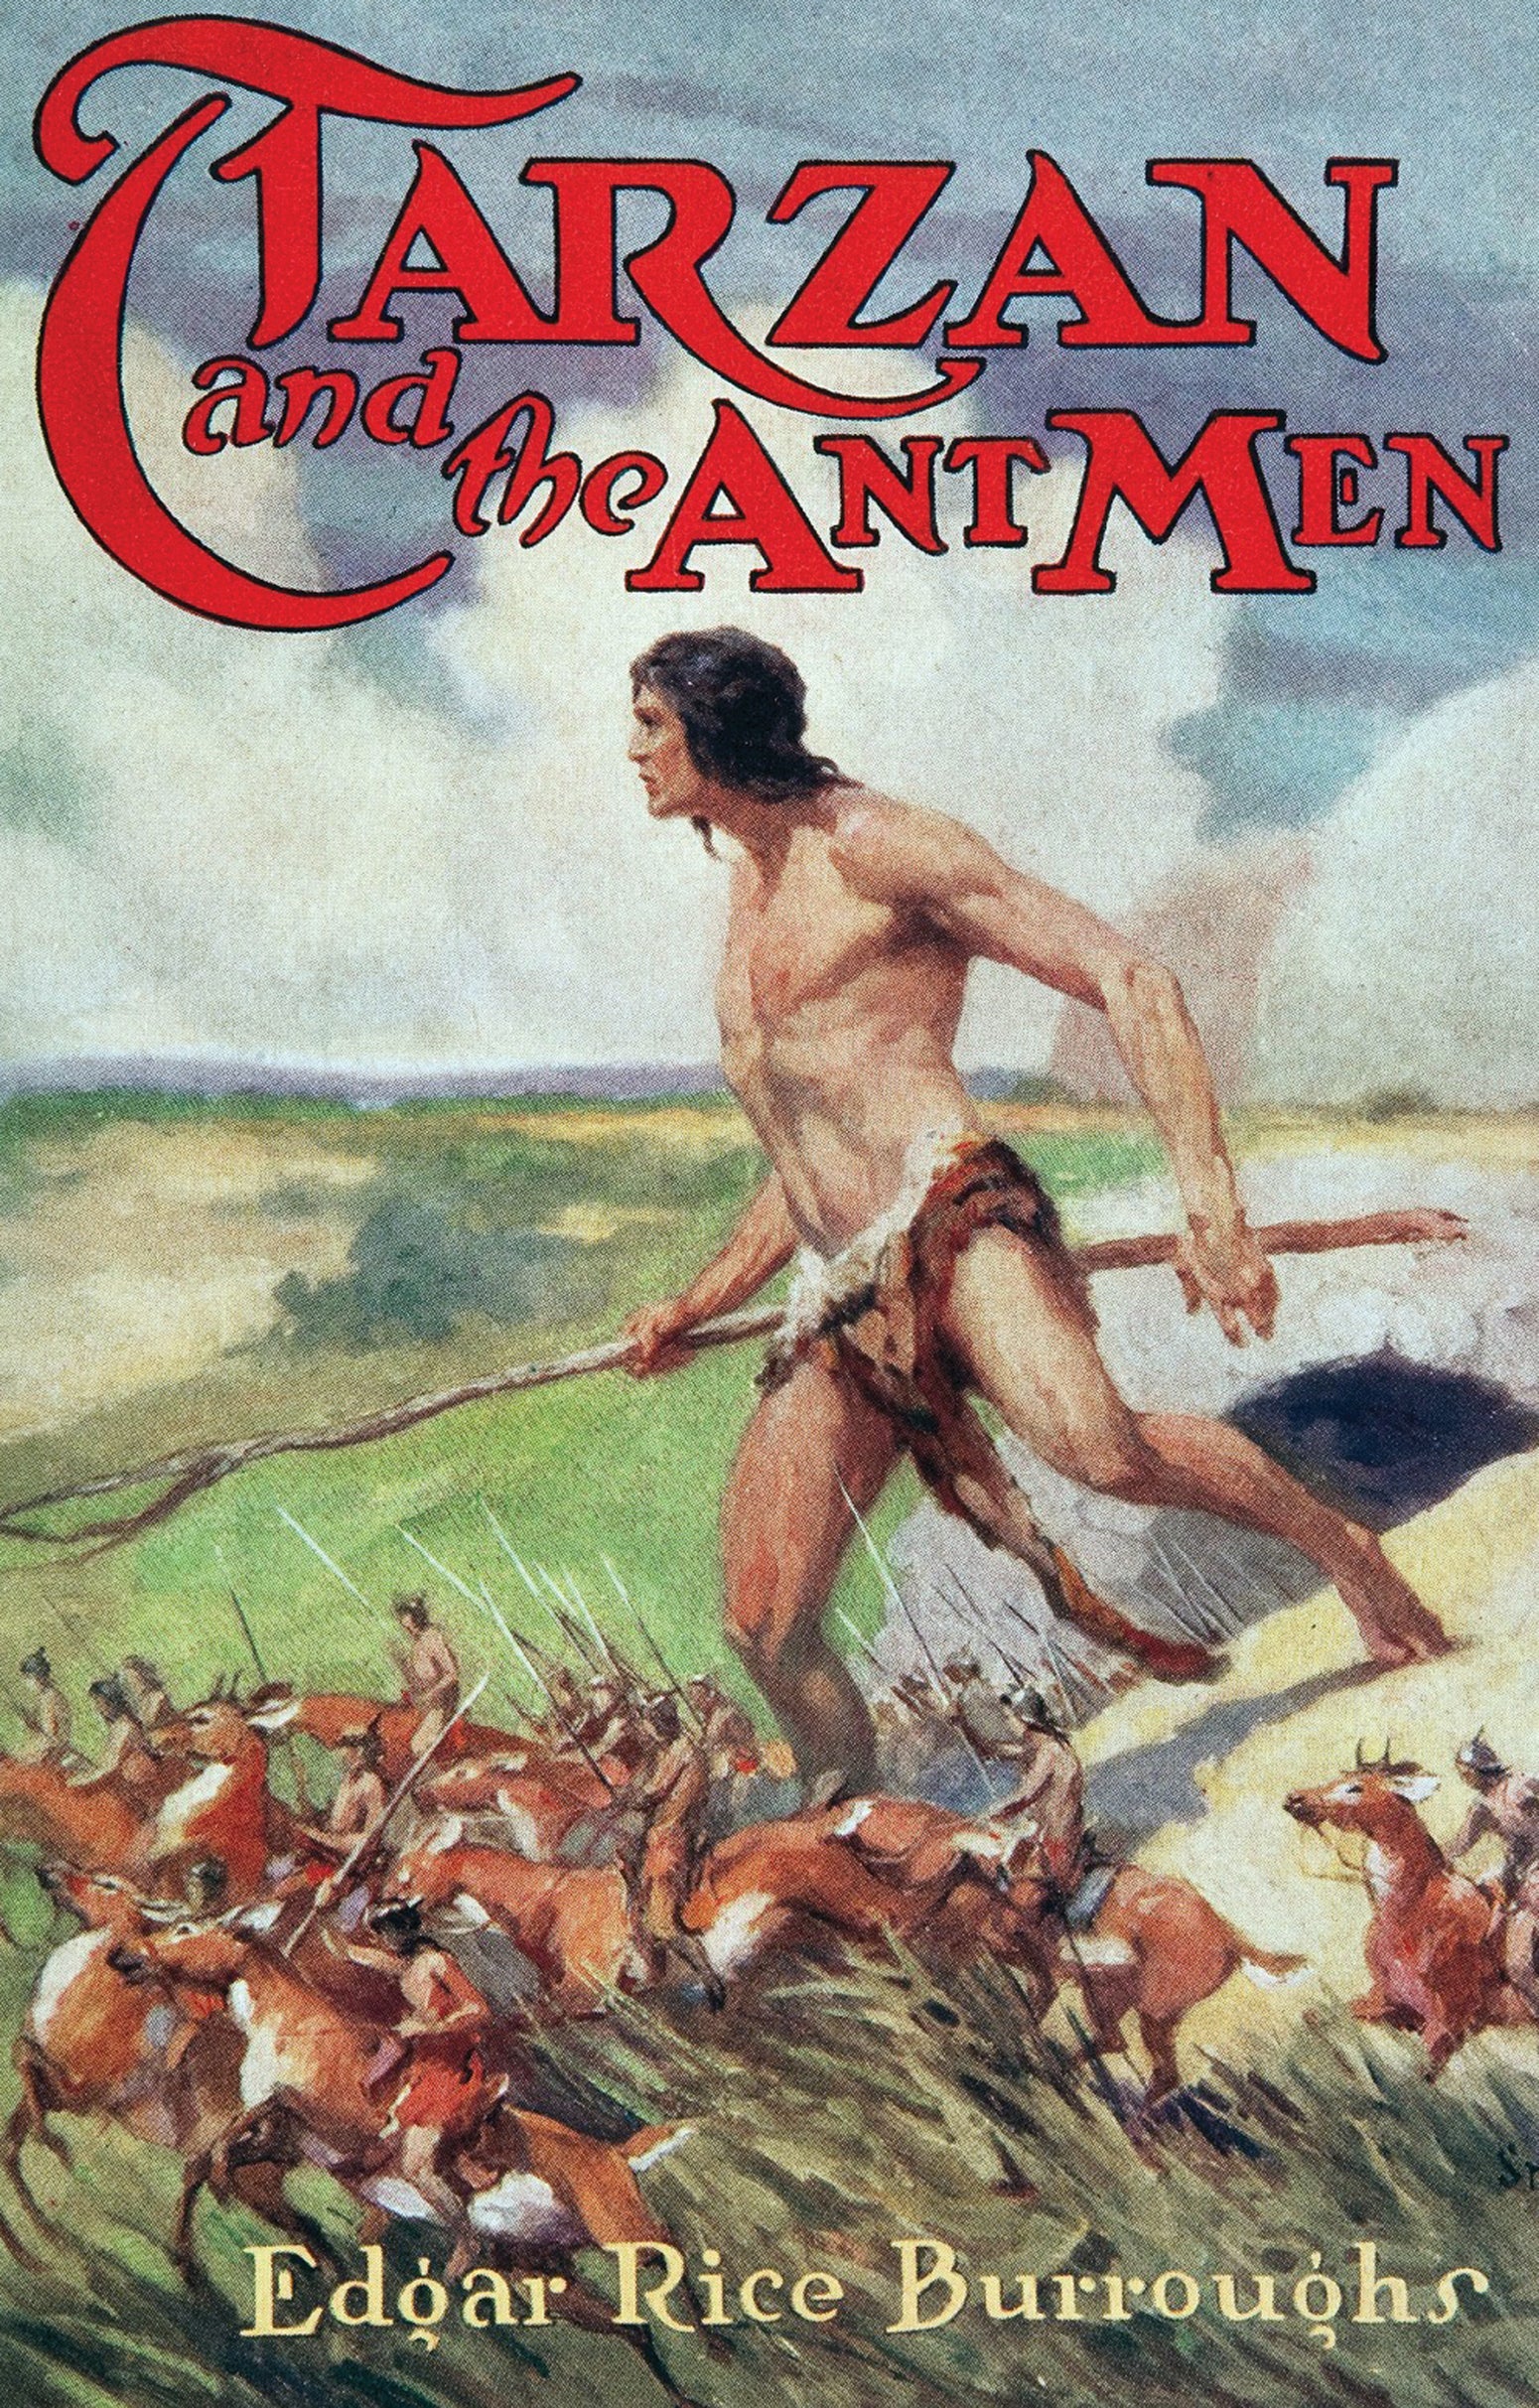 Cover art for Tarzan and the Ant Men.